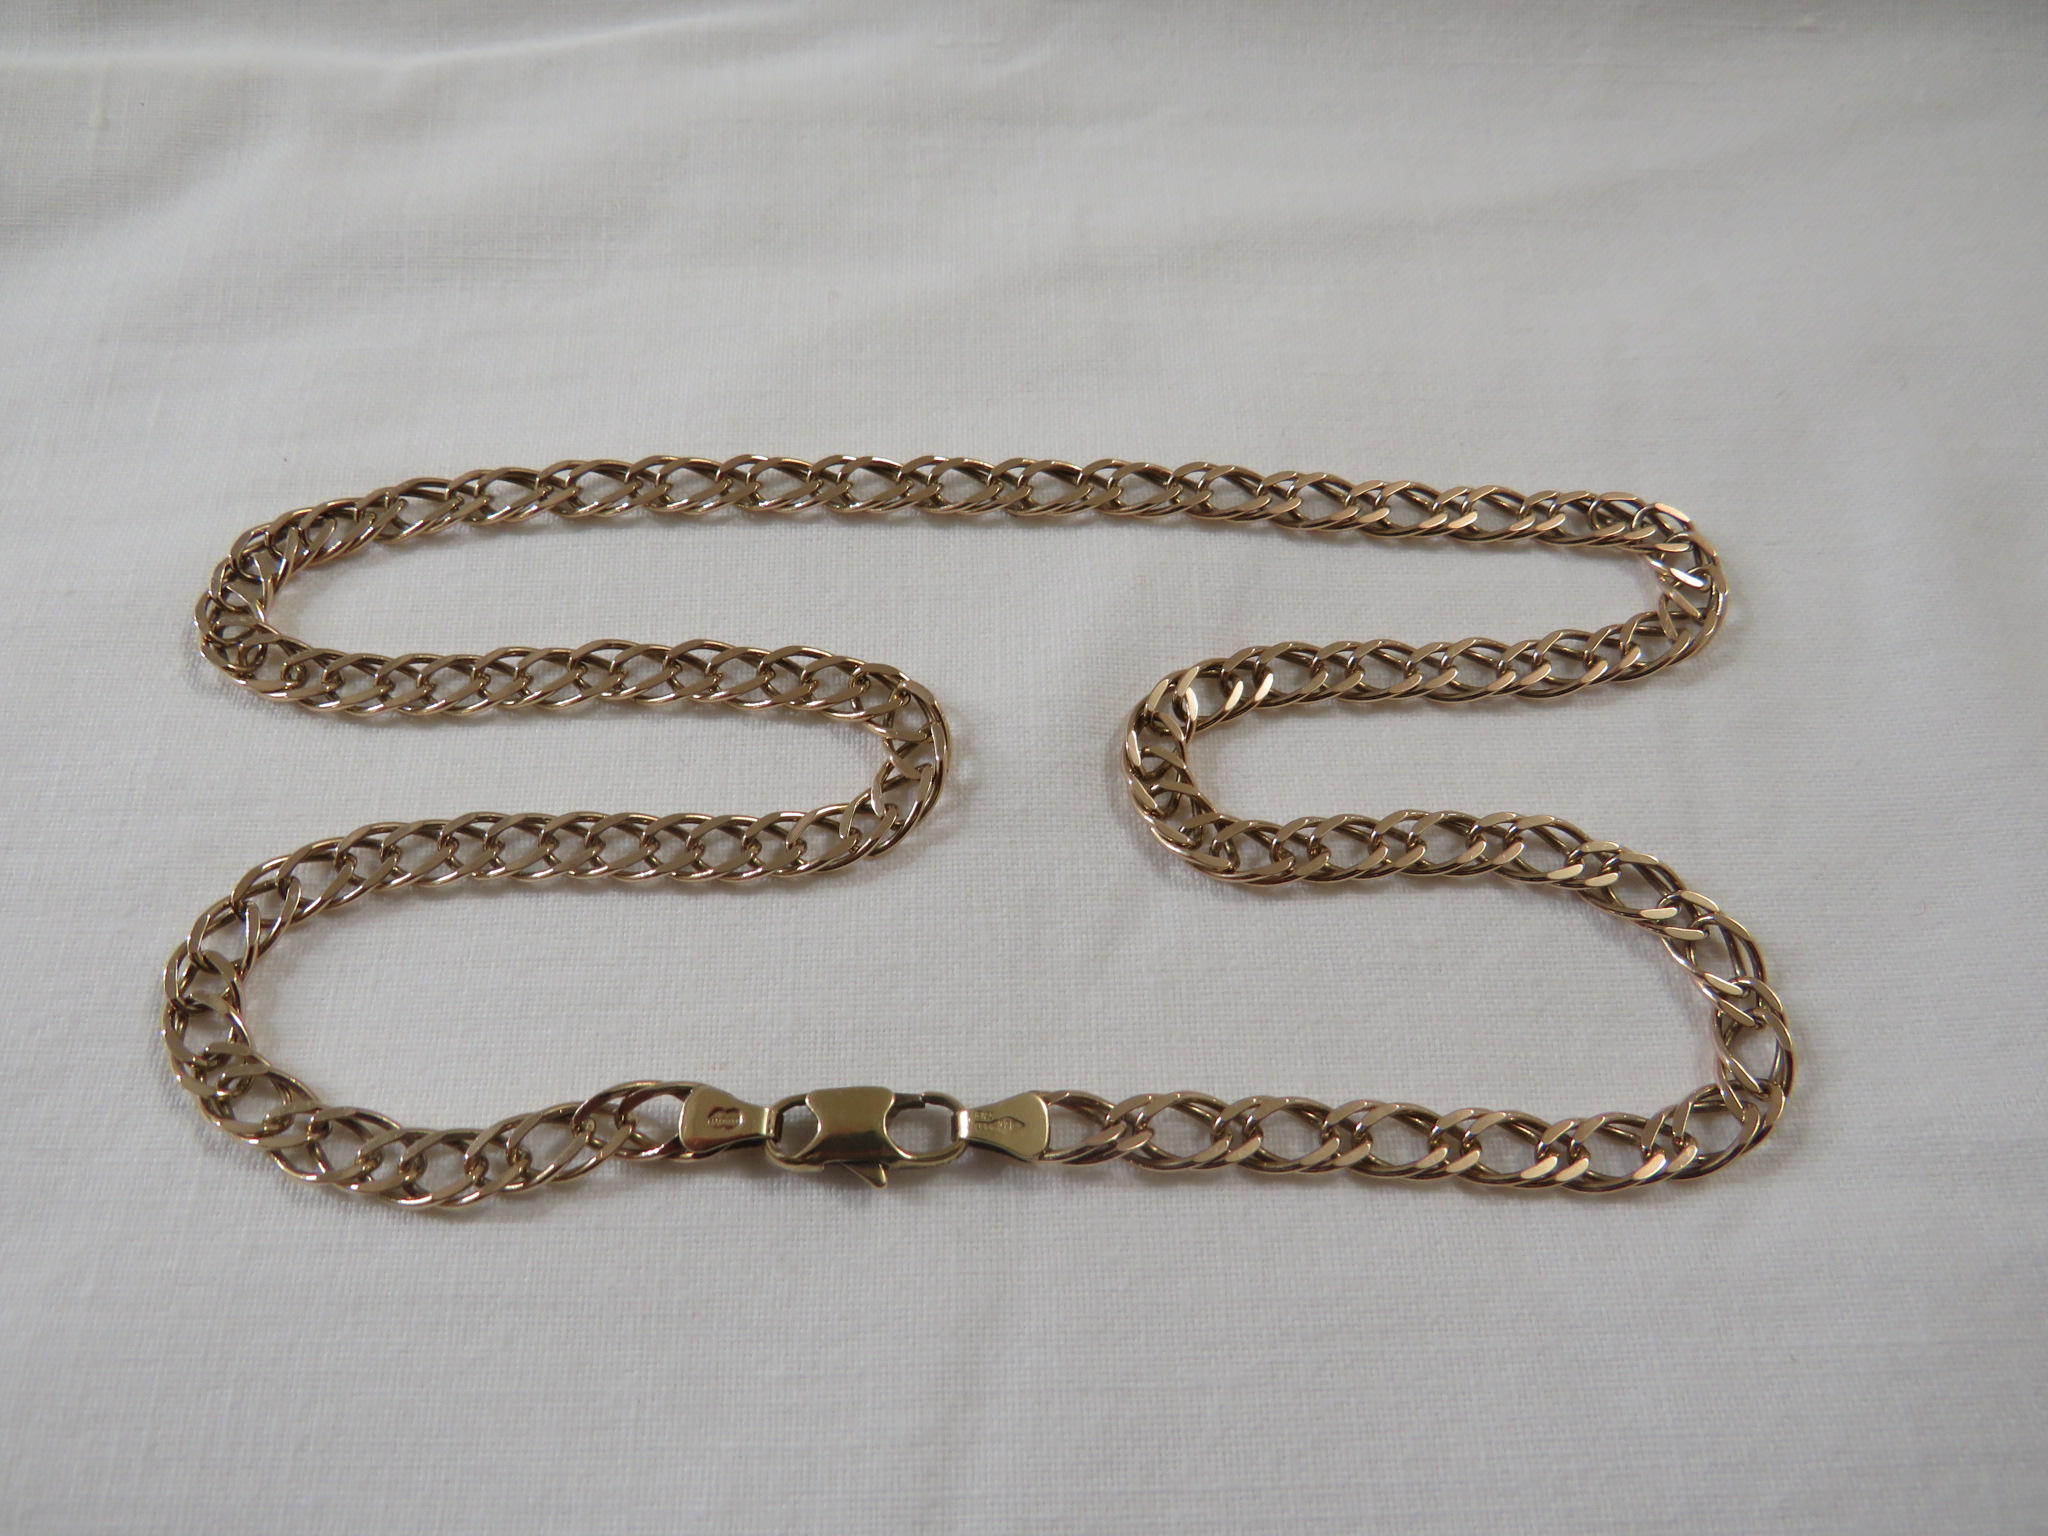 Unoarre yellow metal necklace of double links, stamped 375, length 46cm, 13g, with case - Image 2 of 2